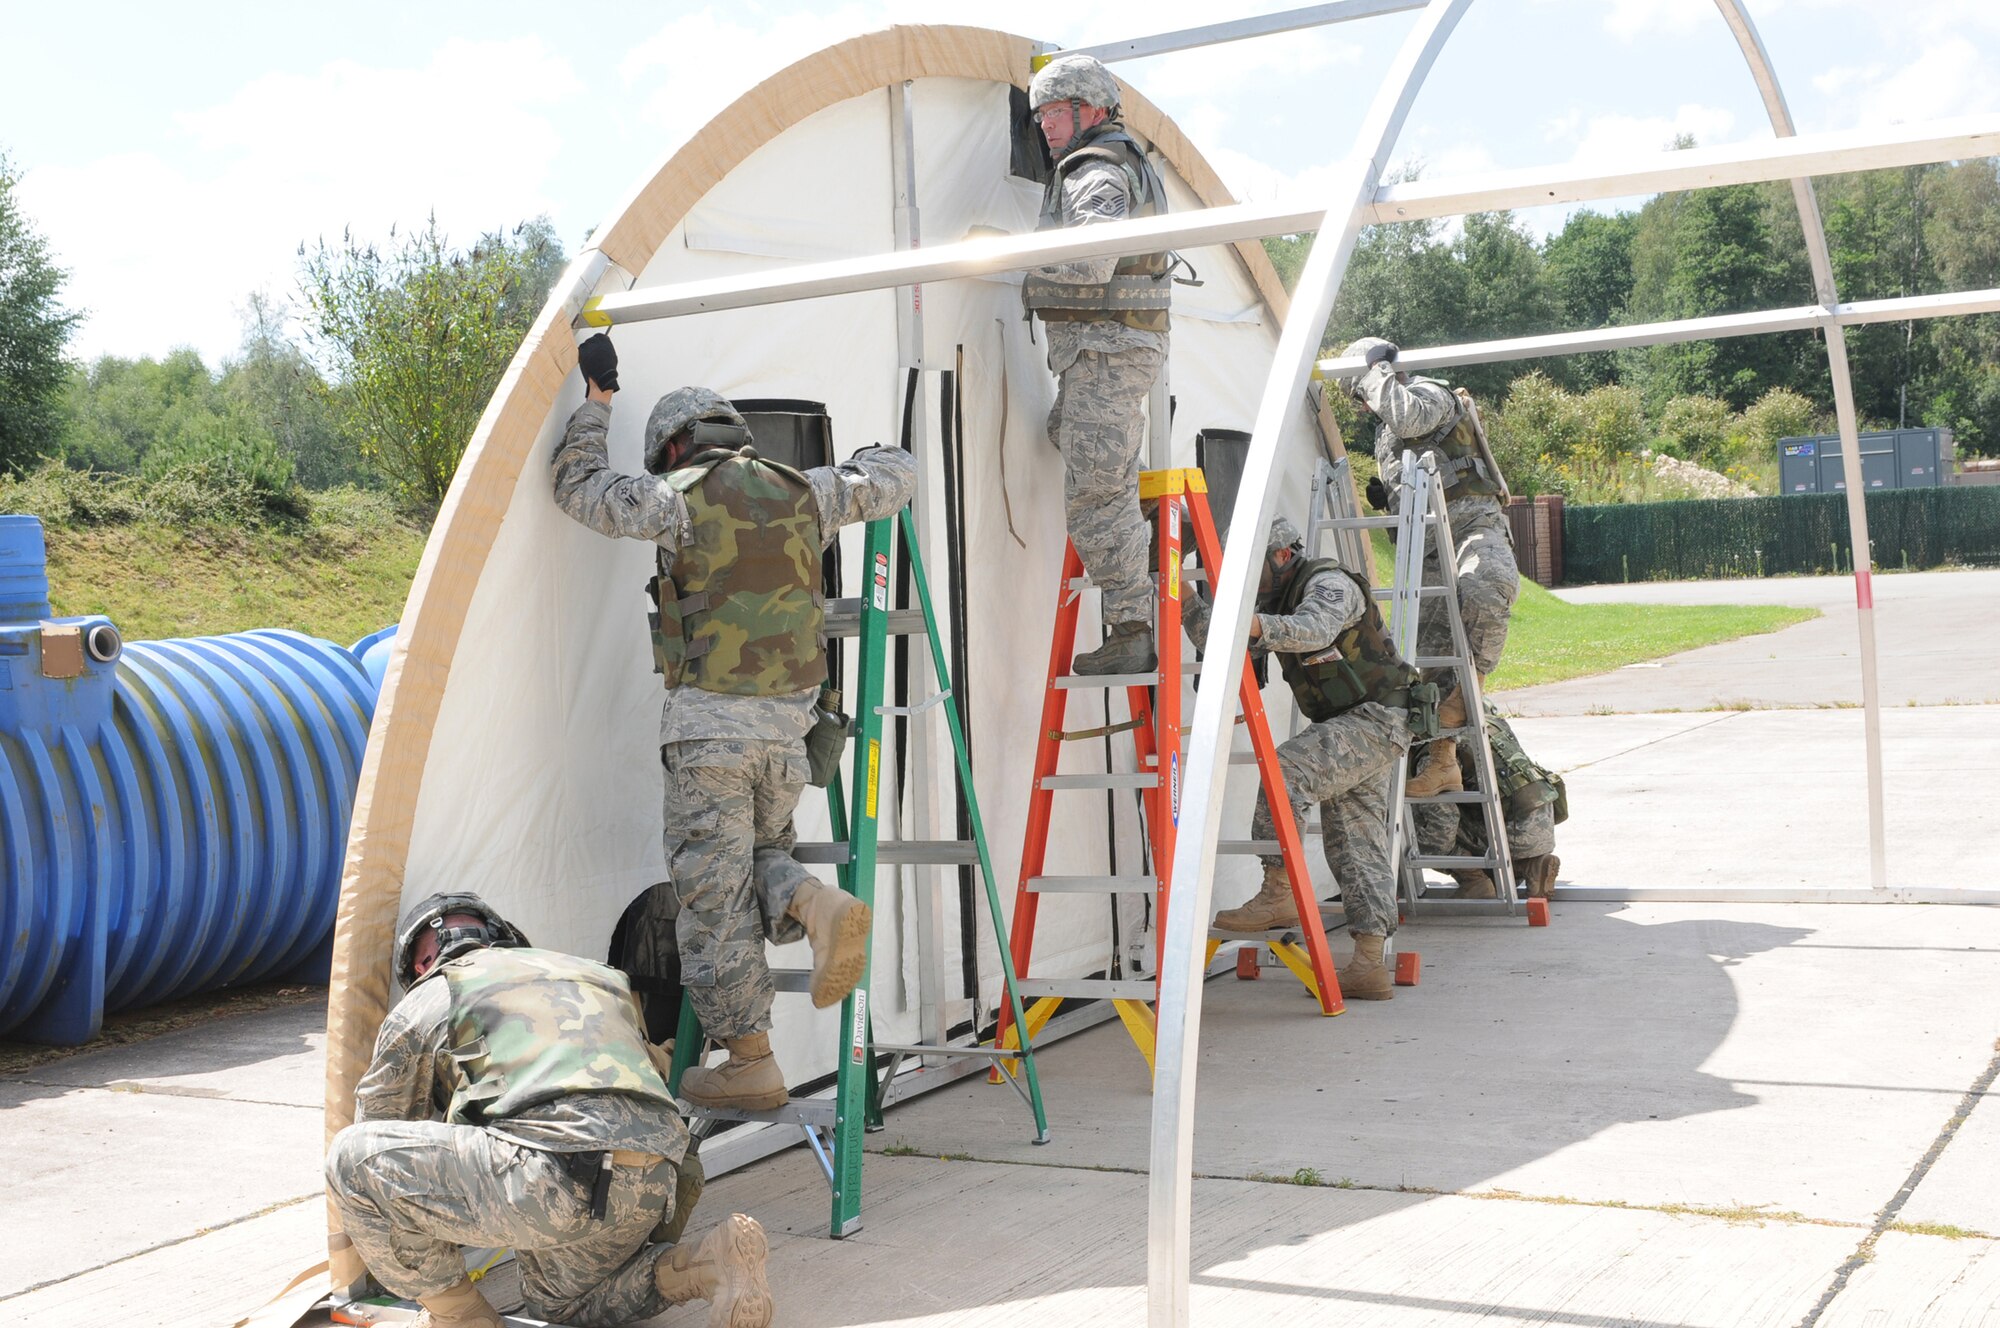 Members from both Ramstein Air Base, Germany and Aviano Air Base, Italy, assemble a small shelter system during a seven day contingency skills training course August 1, 2009.  Members throughout United States Air Forces in Europe participate in the mandated seven day training hels on Ramstein Air Base, Germany, for civil engineers, services, logistics, medical and personnelists. (U.S. Air Force photo by: Tech. Sgt. Sean Mateo White)